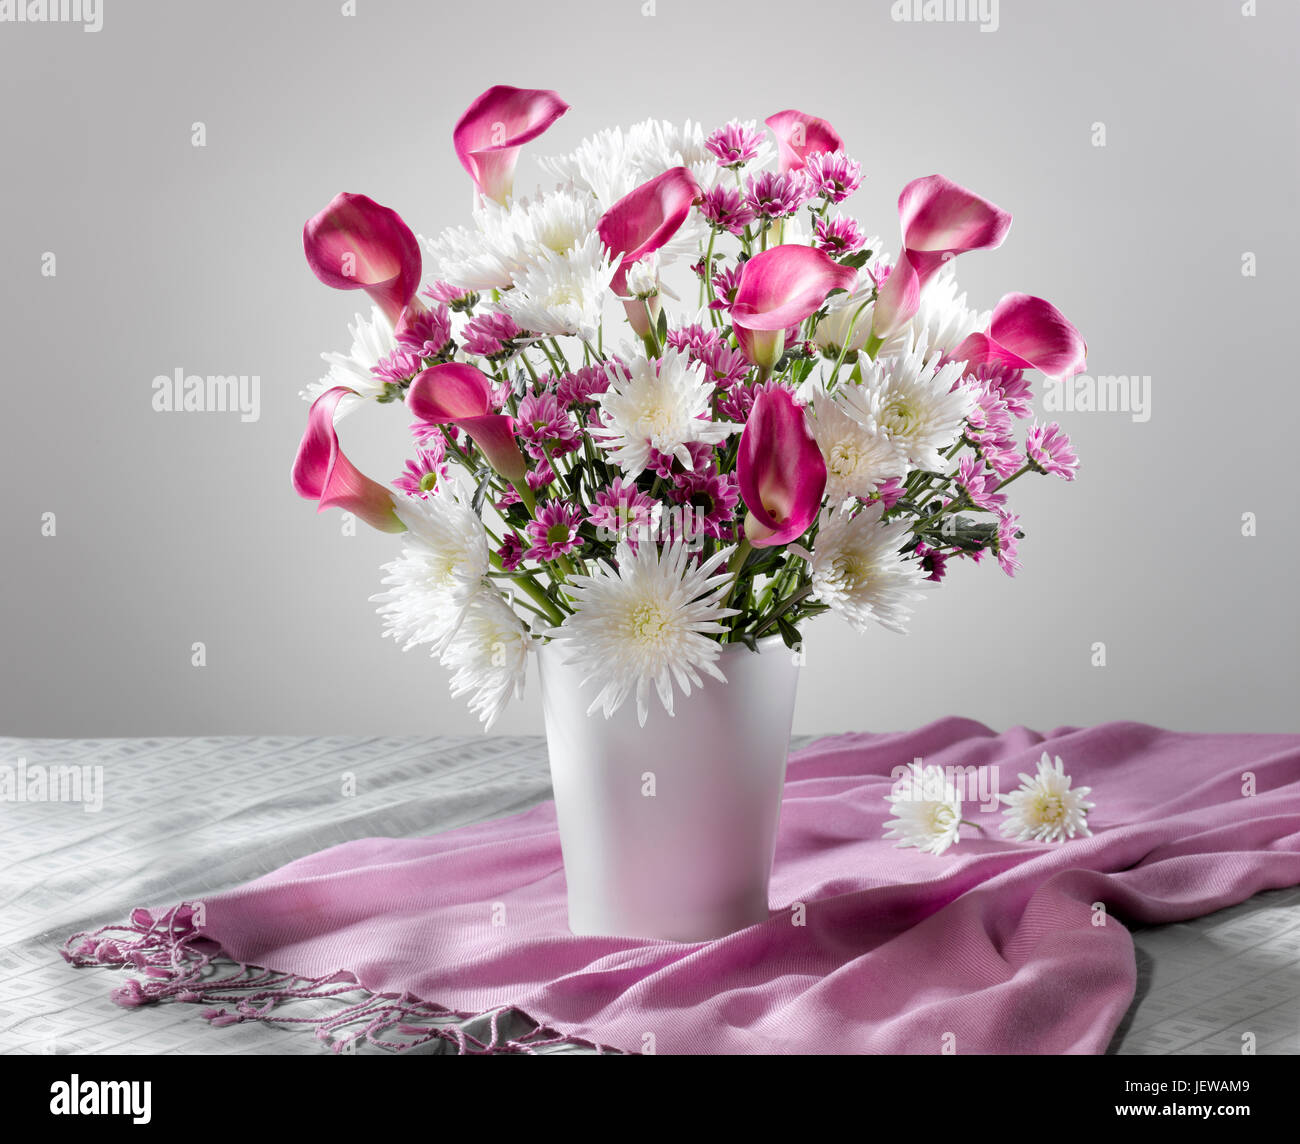 Bouquet of flowers. Stock Photo